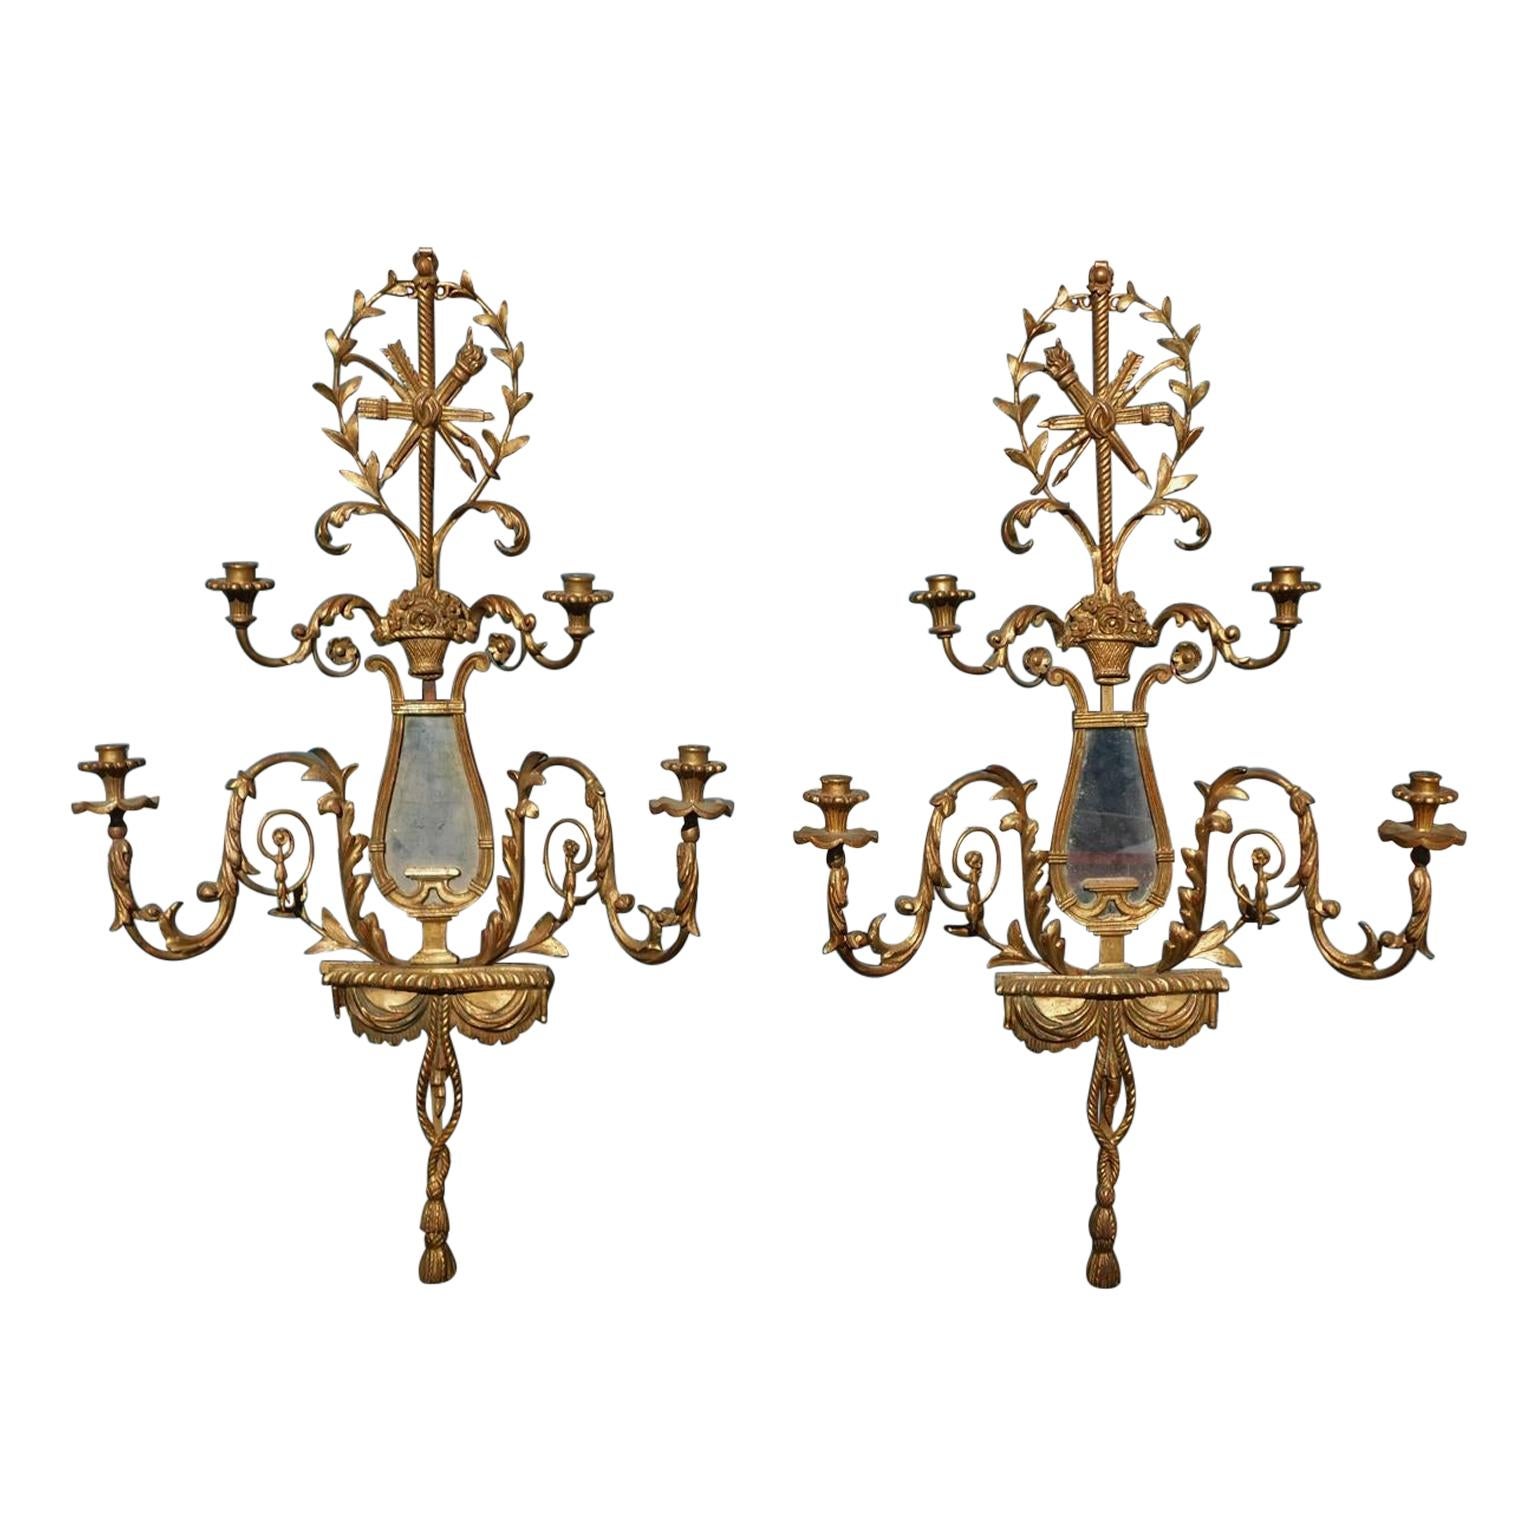 Pair of French Gilt Wood & Gesso Four Arm Foliage & Mirror Wall Sconces, C. 1820